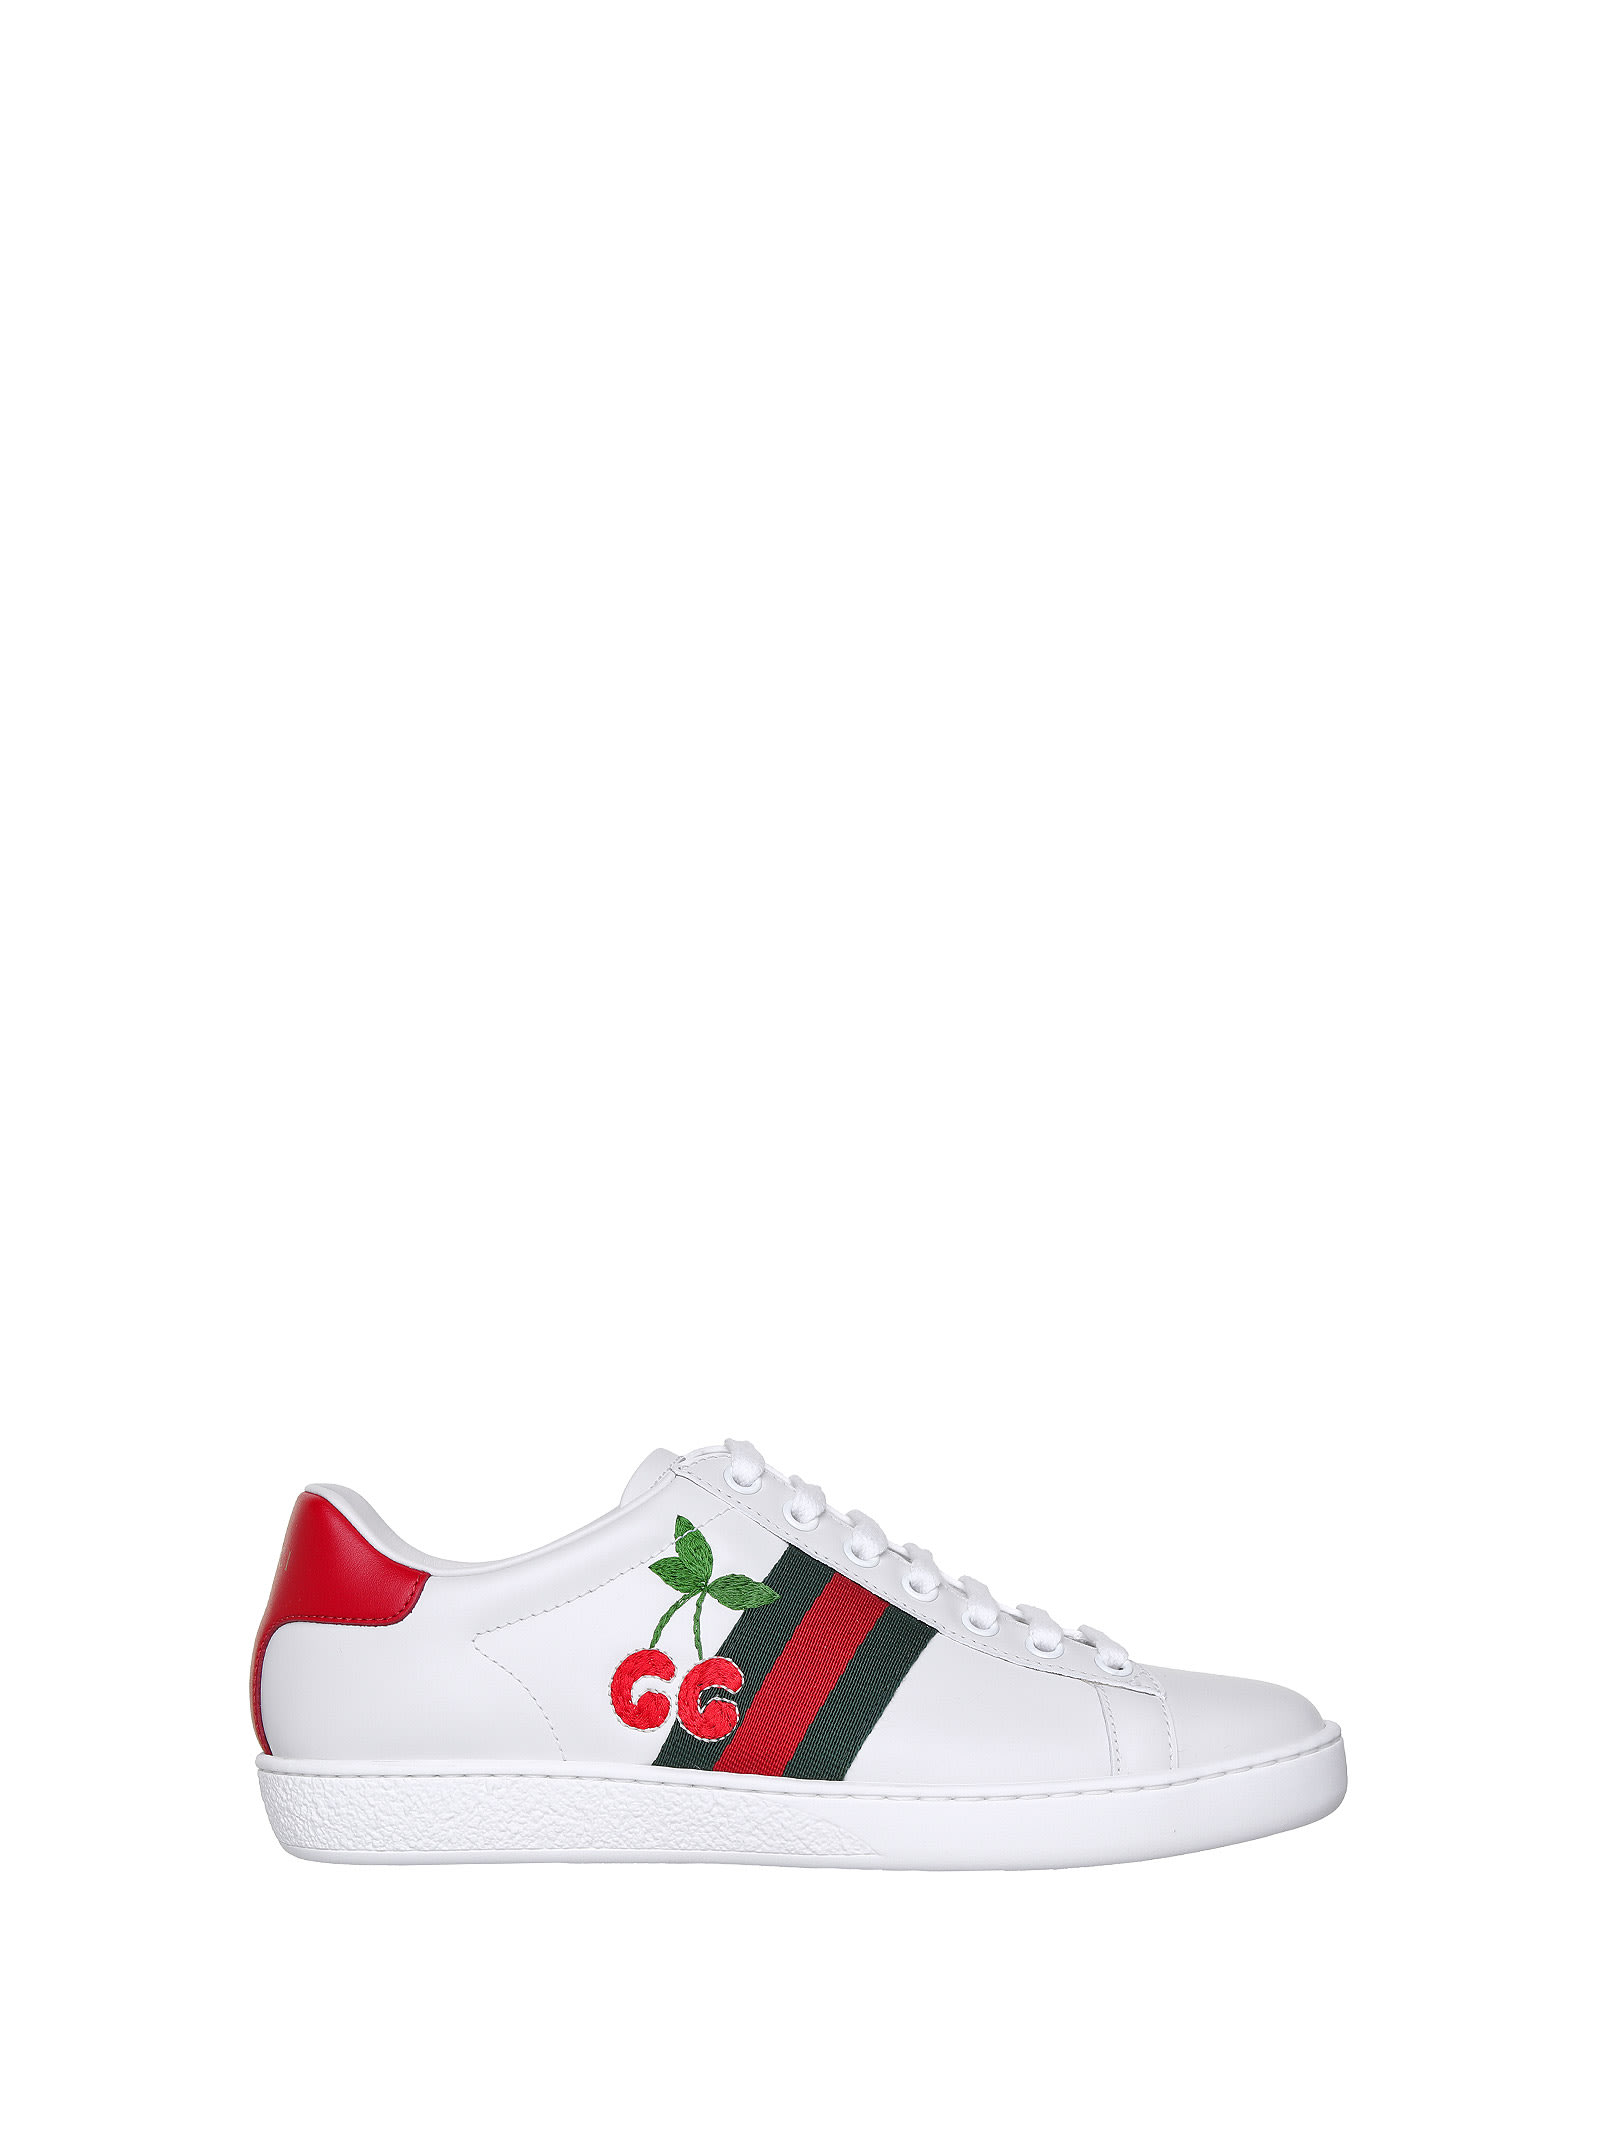 Gucci Gucci Ace With Cherries